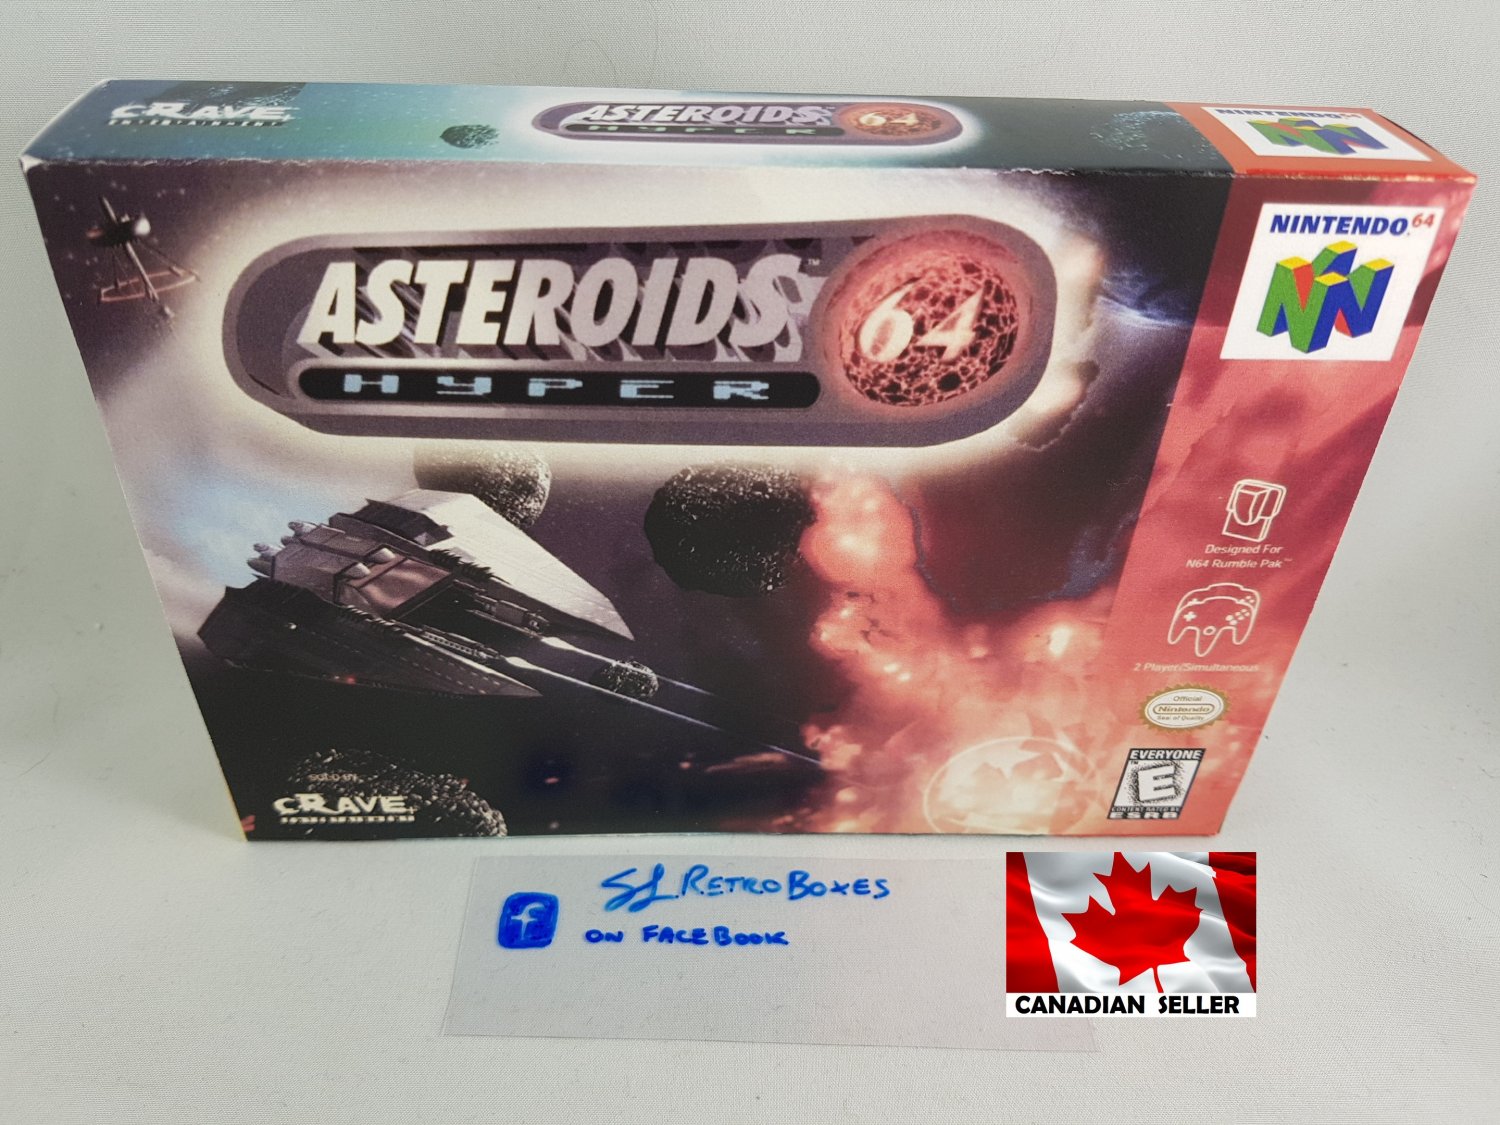 ASTEROIDS HYPER 64 - N64, Nintendo64 Custom replacement Box with Insert Tray & PVC Protector